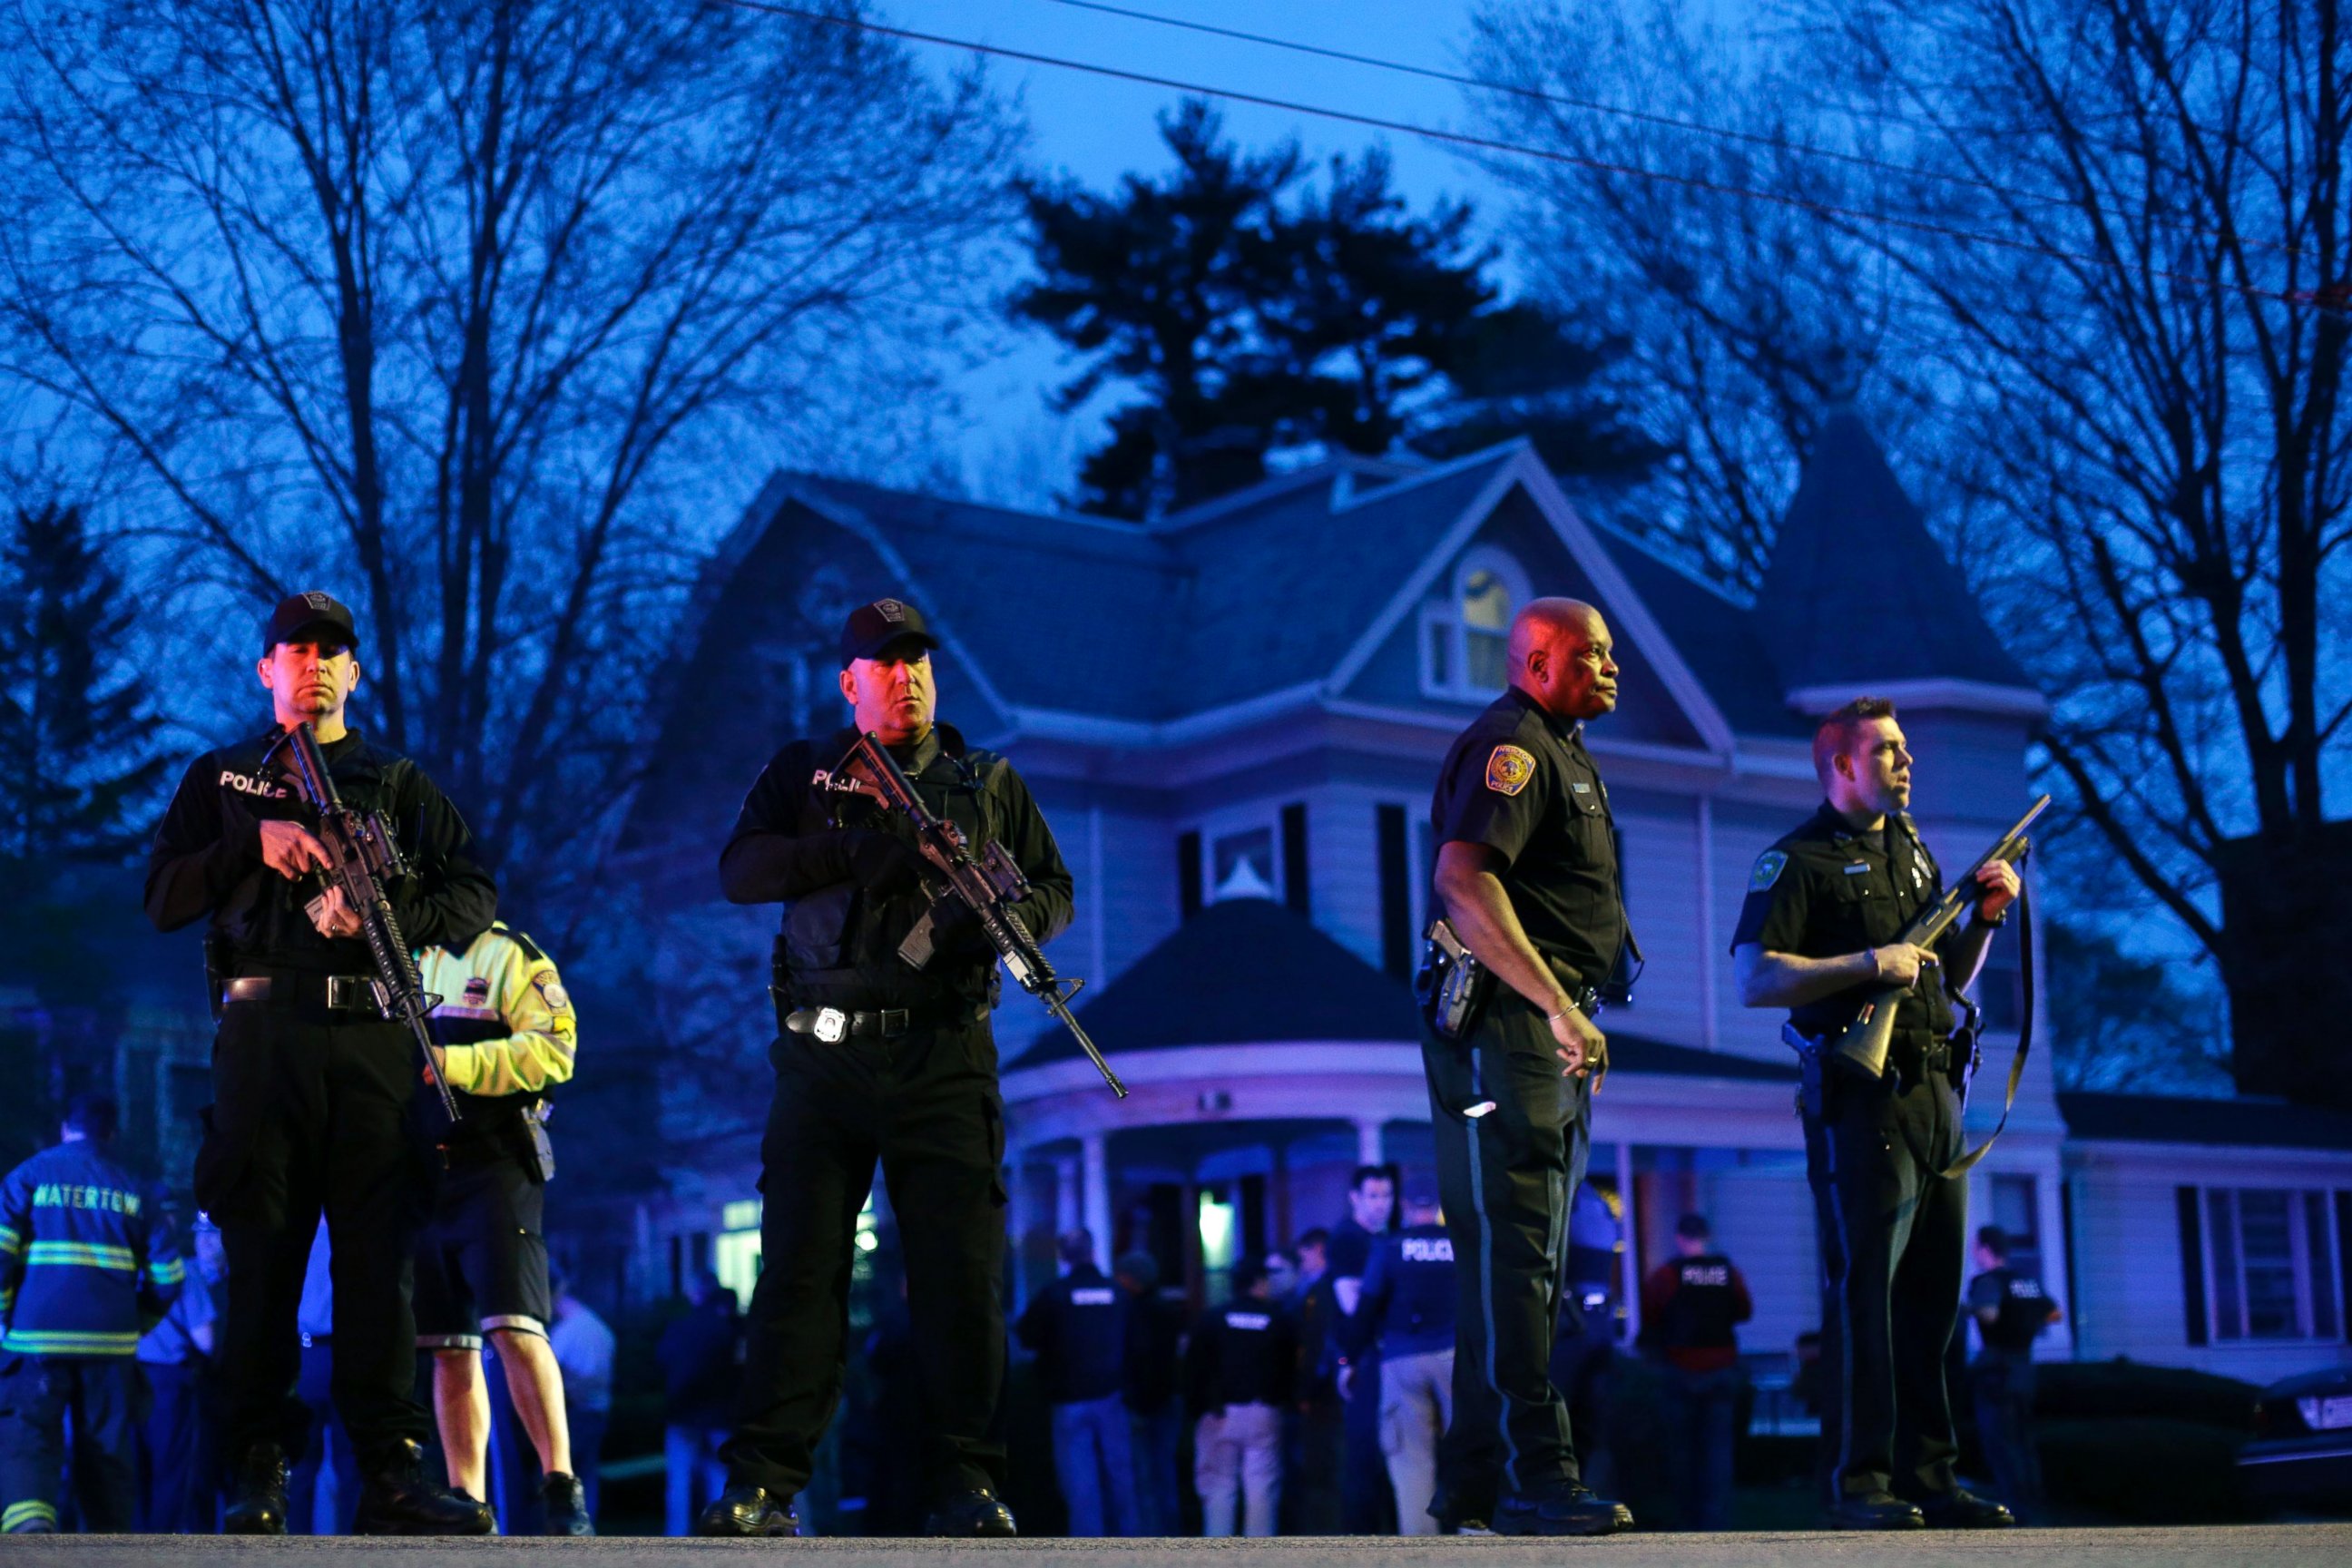 PHOTO: Police officers guard the entrance to Franklin street where there is an active crime scene search for the suspect in the Boston Marathon bombings, April 19, 2013, in Watertown, Mass.